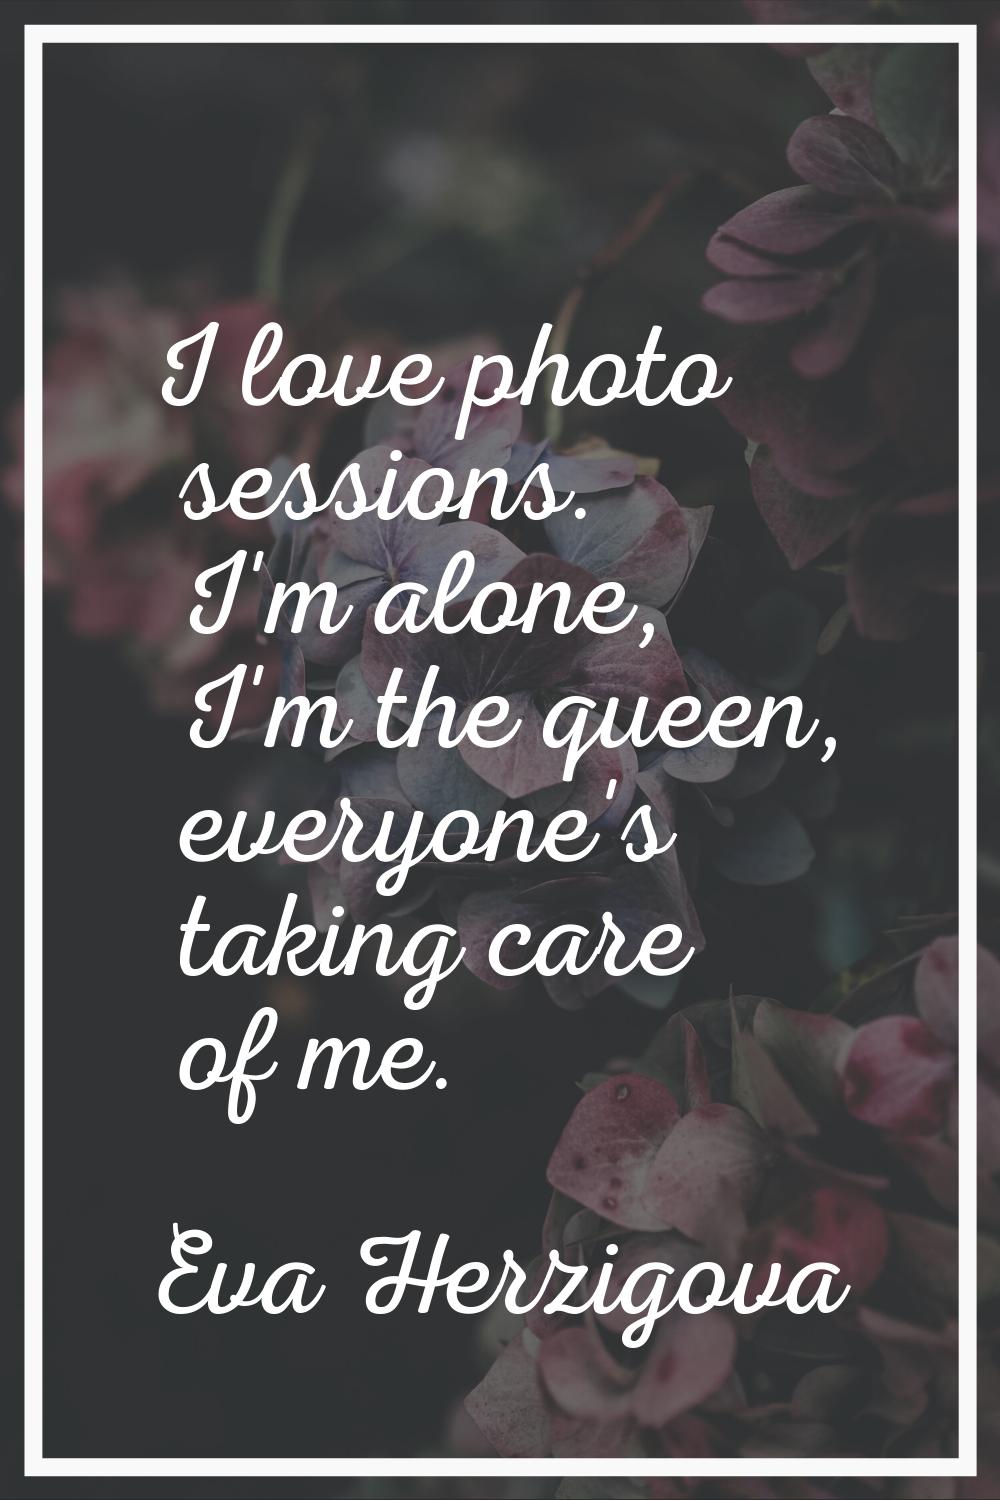 I love photo sessions. I'm alone, I'm the queen, everyone's taking care of me.